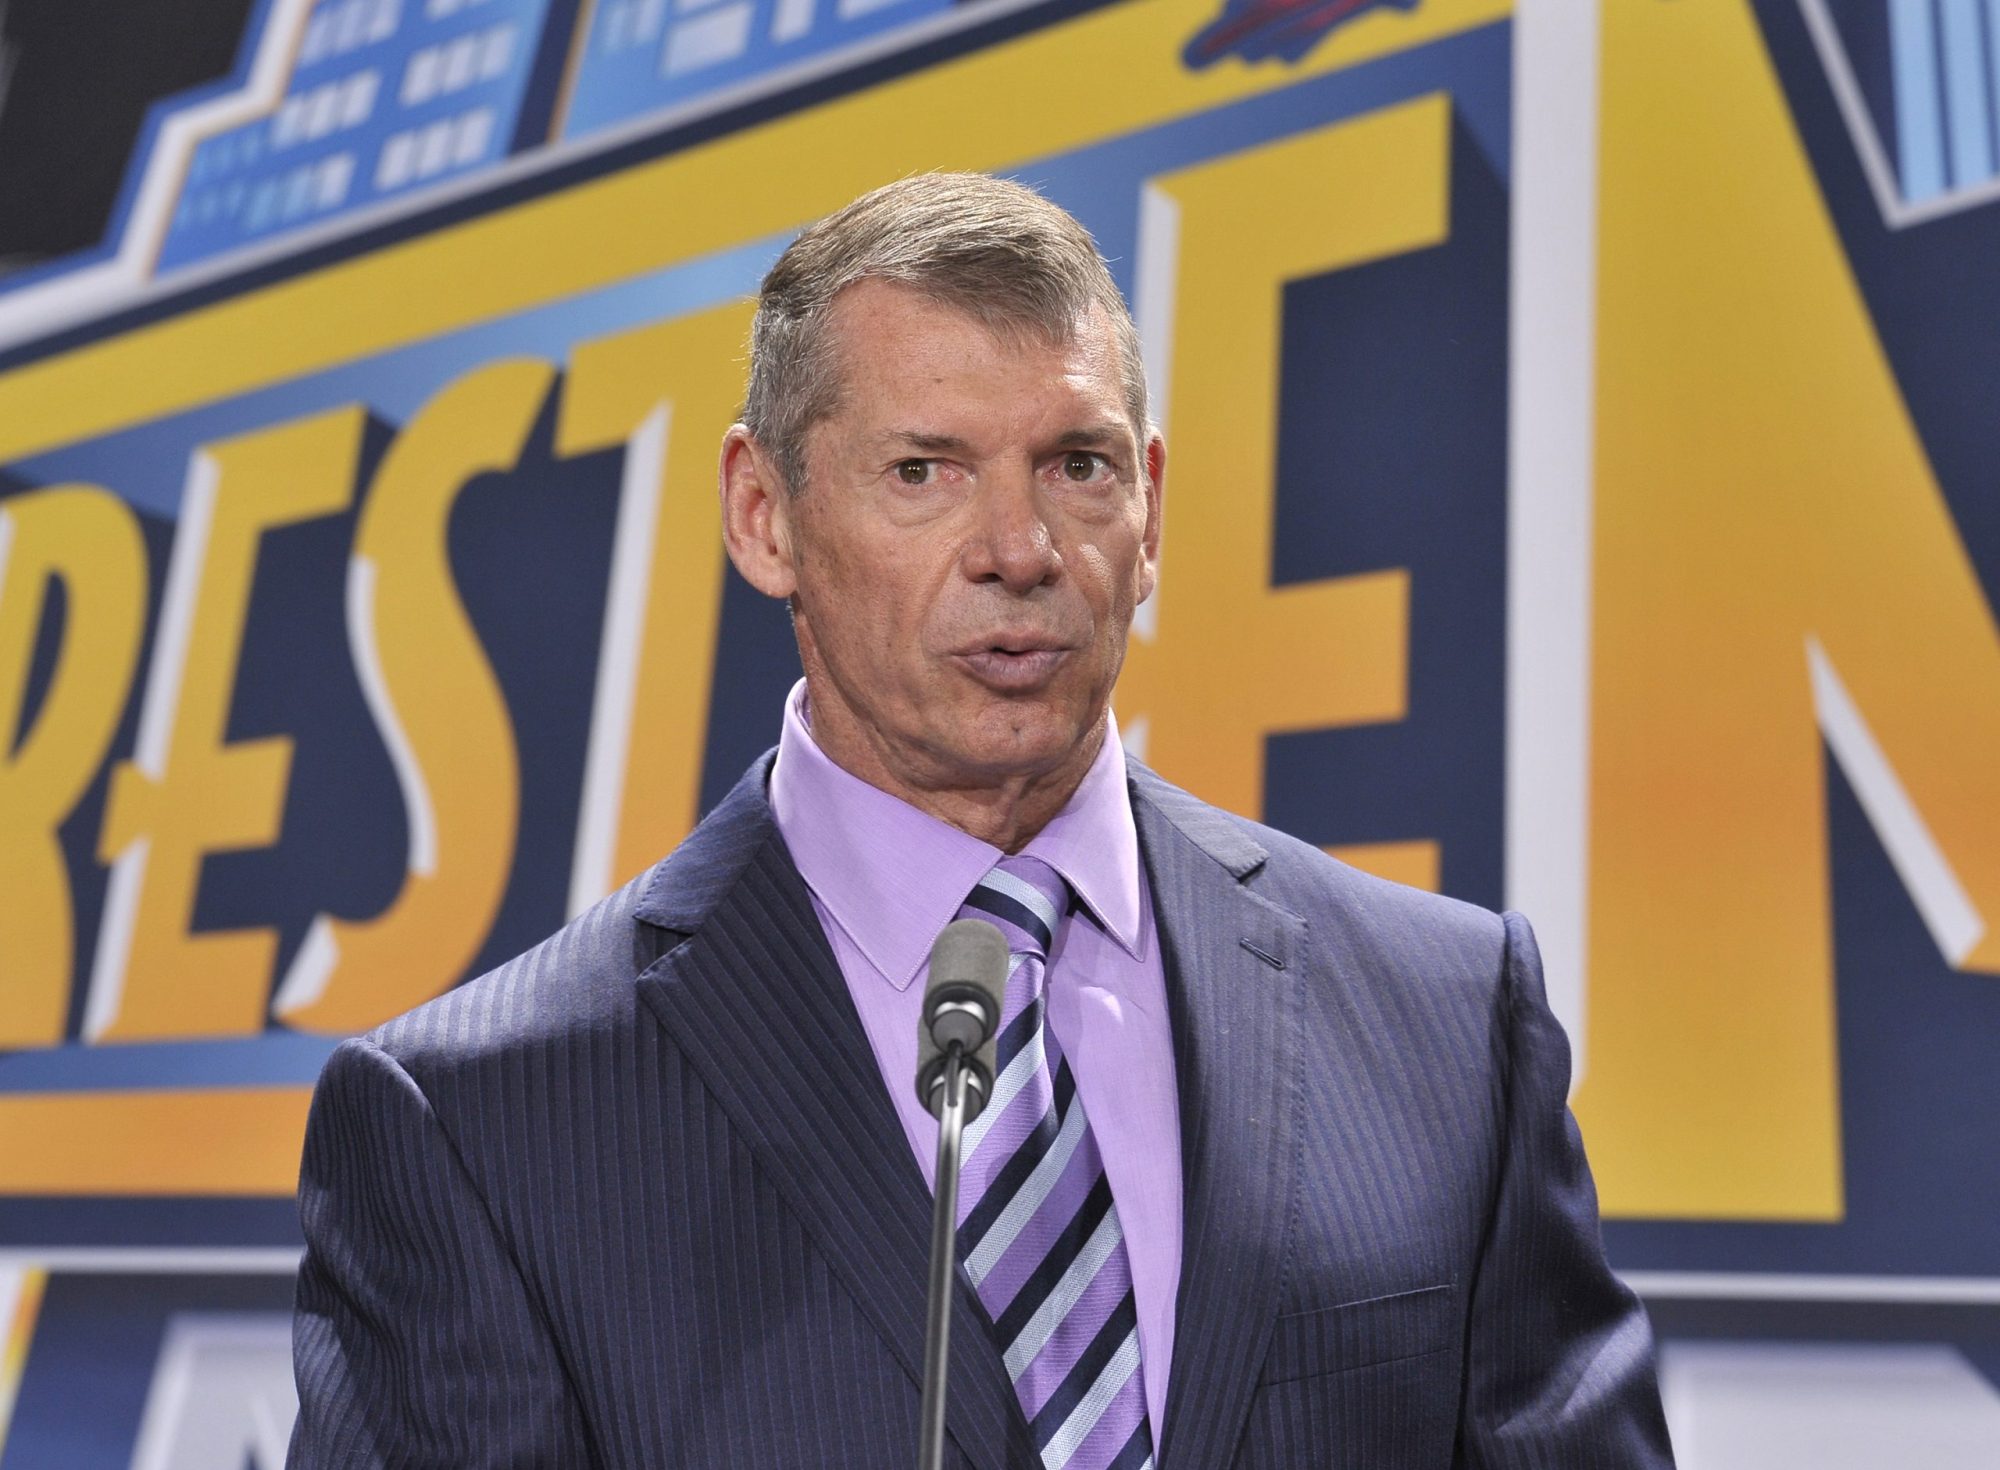 Vince McMahon attends a press conference to announce that WWE Wrestlemania 29 will be held at MetLife Stadium in 2013 at MetLife Stadium on February 16, 2012 in East Rutherford, New Jersey. Photo by Michael N. Todaro/Getty Images